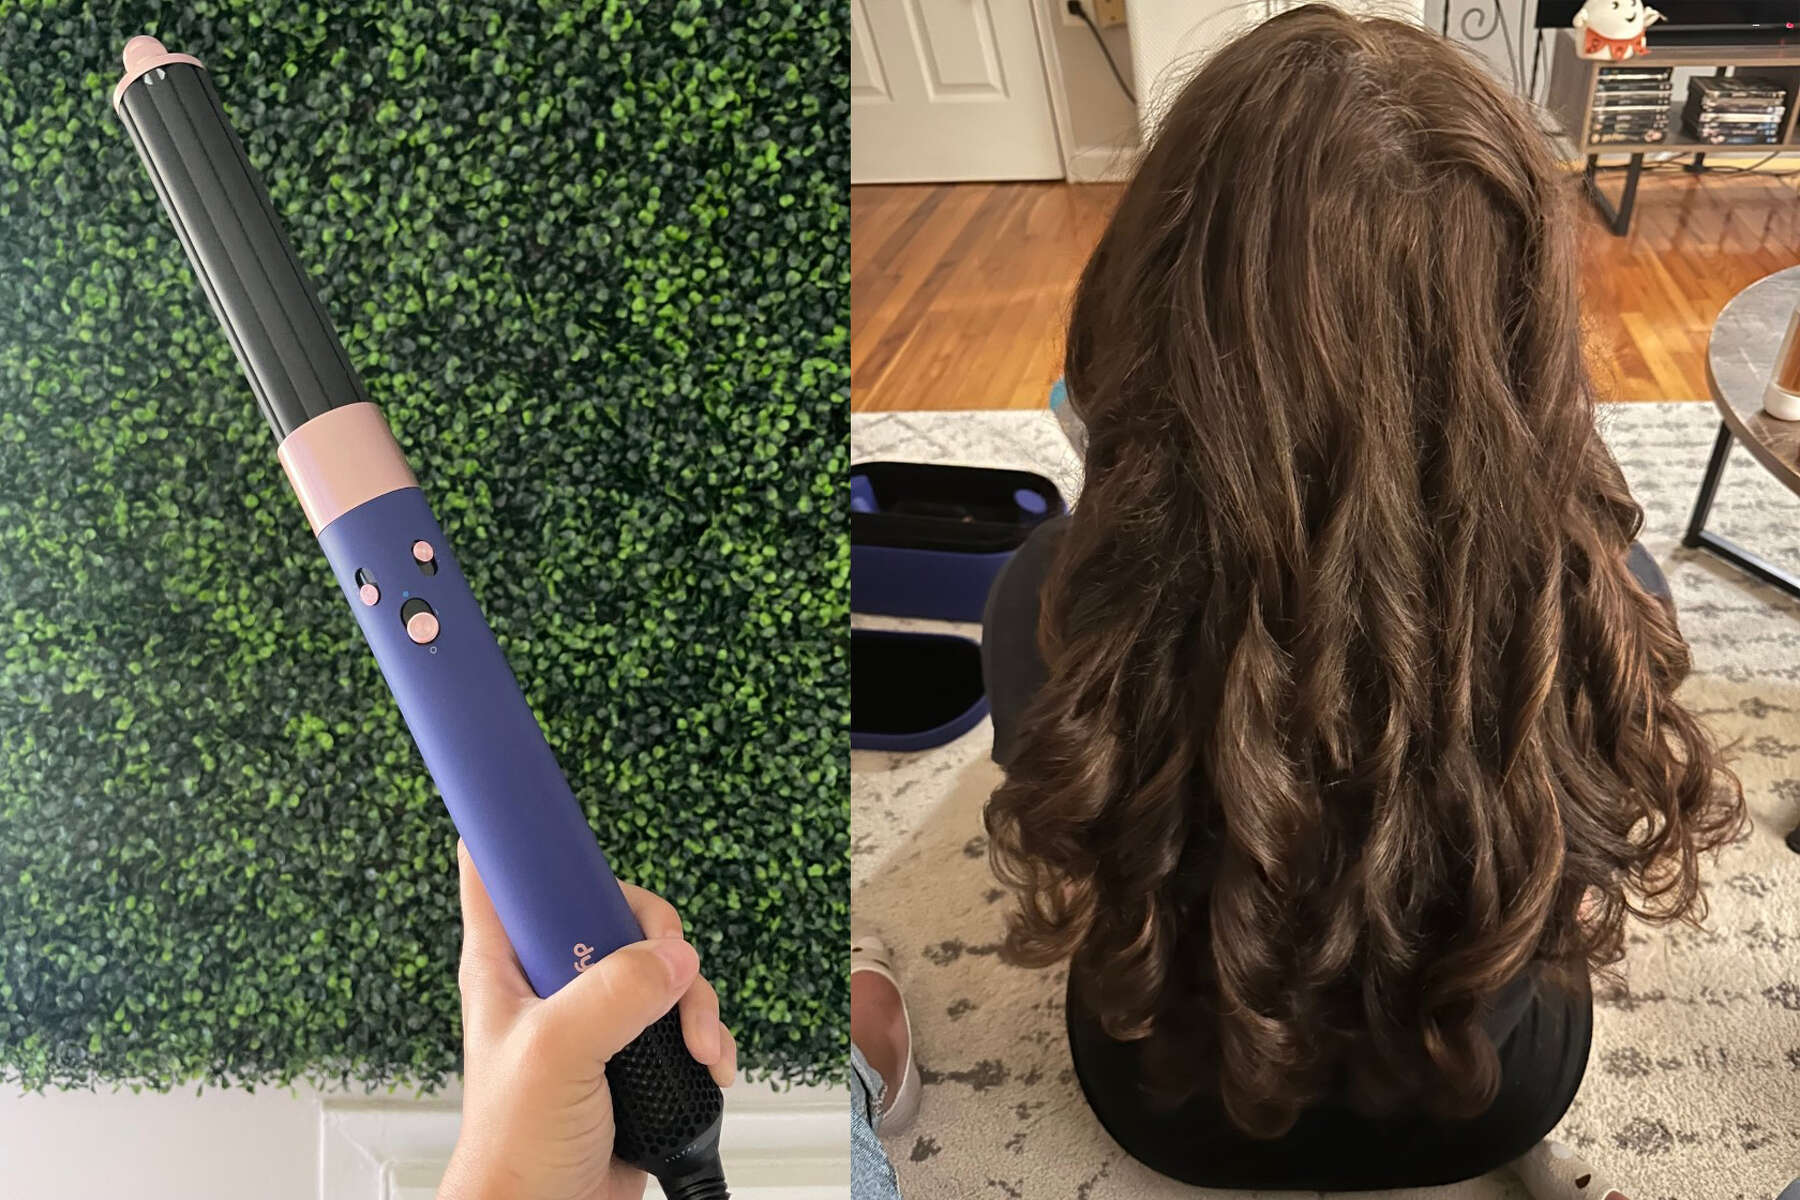 Dyson Airwrap review: The new is not #1 favorite Dyson hair tool